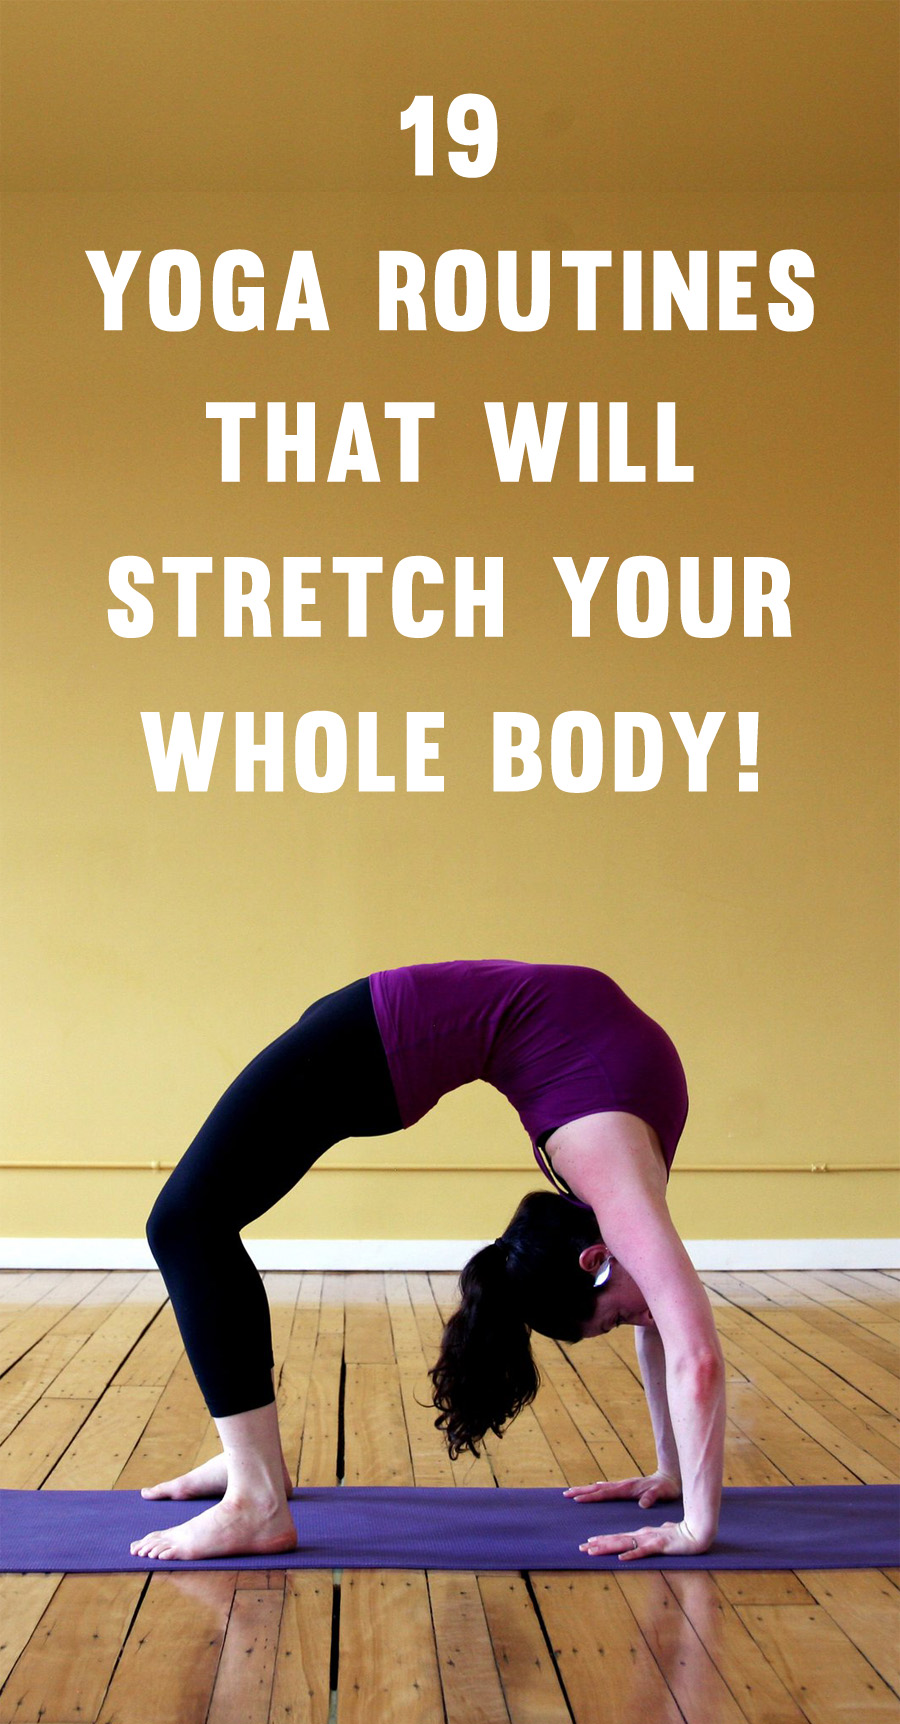 19 Yoga Routines That Will Stretch Your Whole Body & Make You Feel